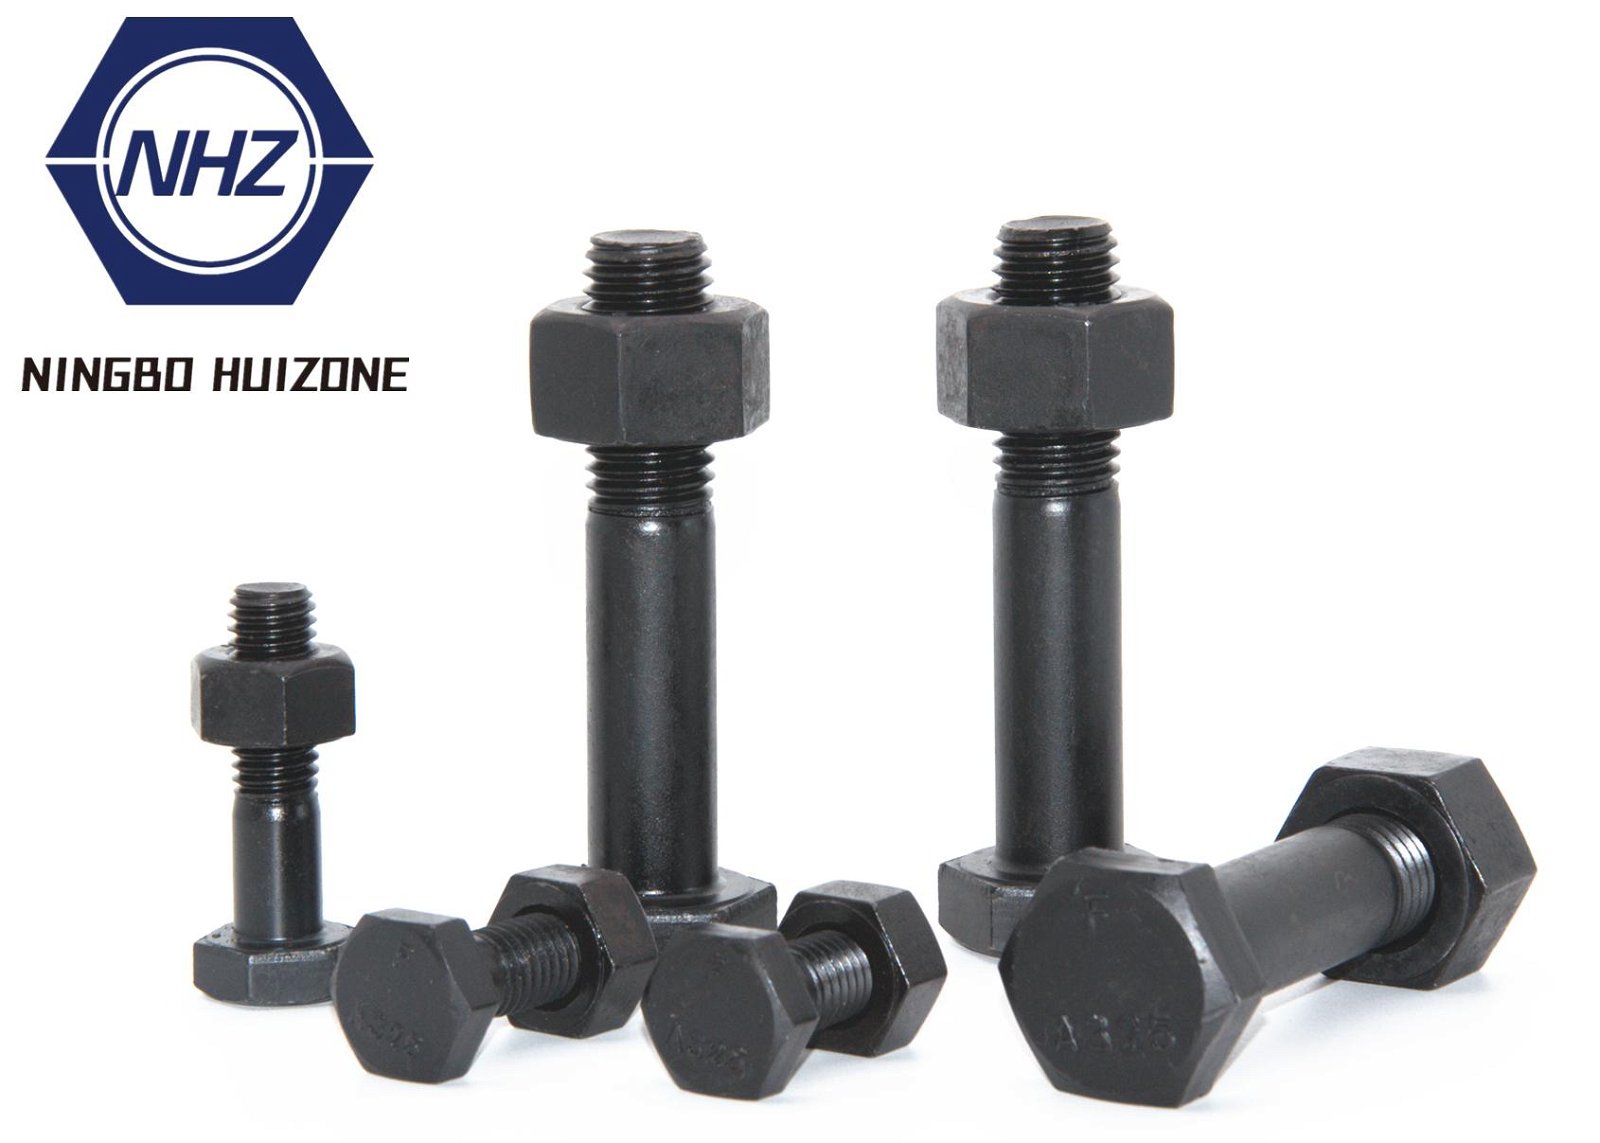 ASTM F3125 GR A325 HEAVY HEX STRUCTURAL BOLT